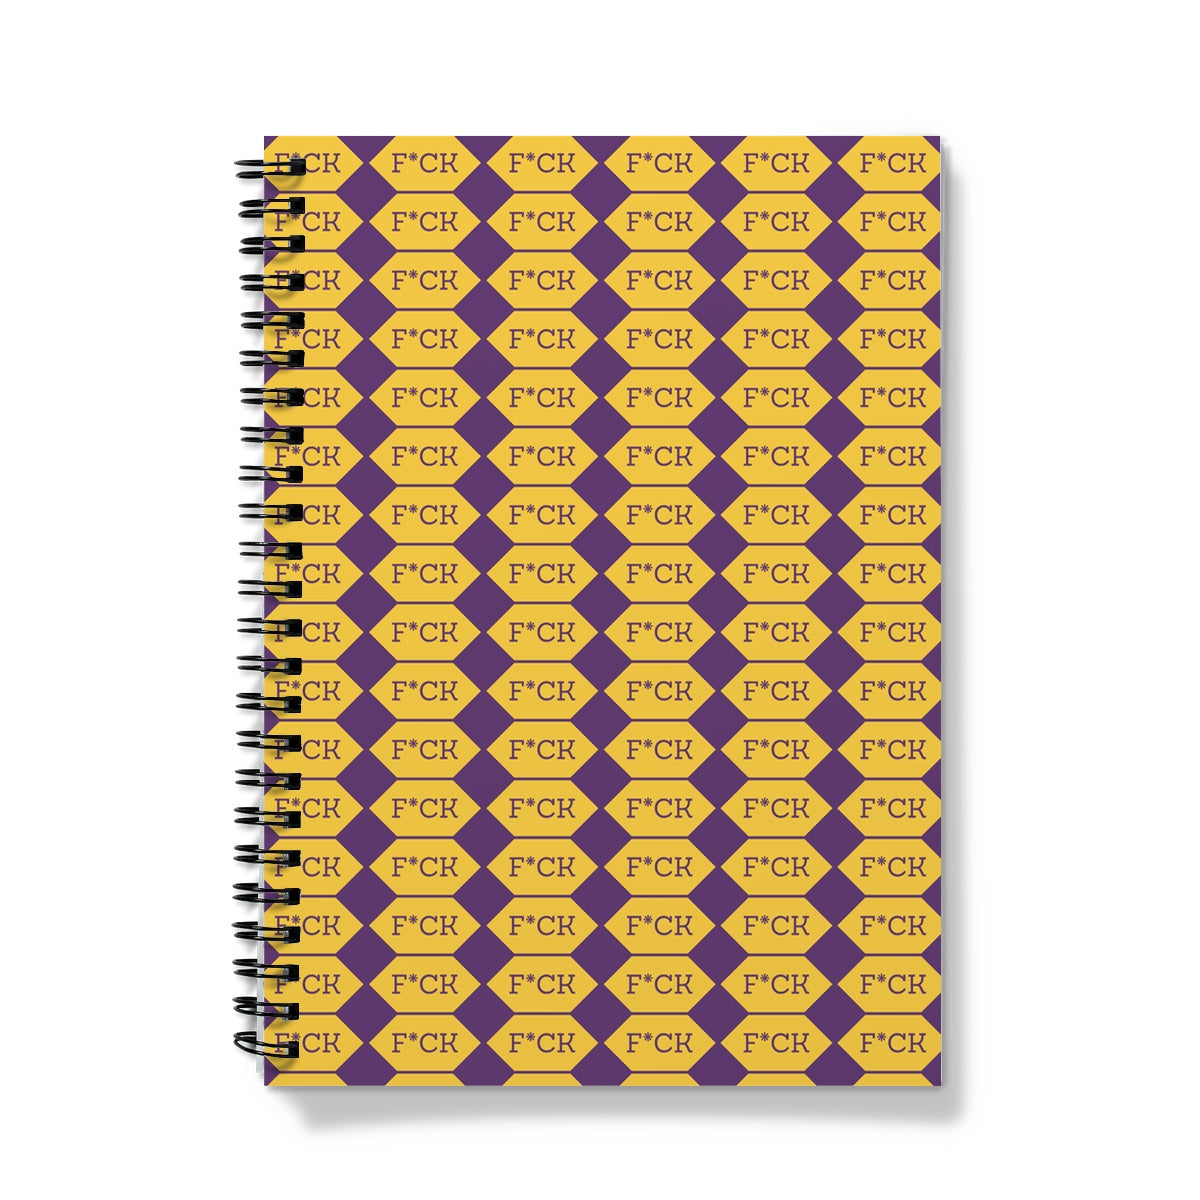 F*CK Adult Funny Purple and Yellow Notebook